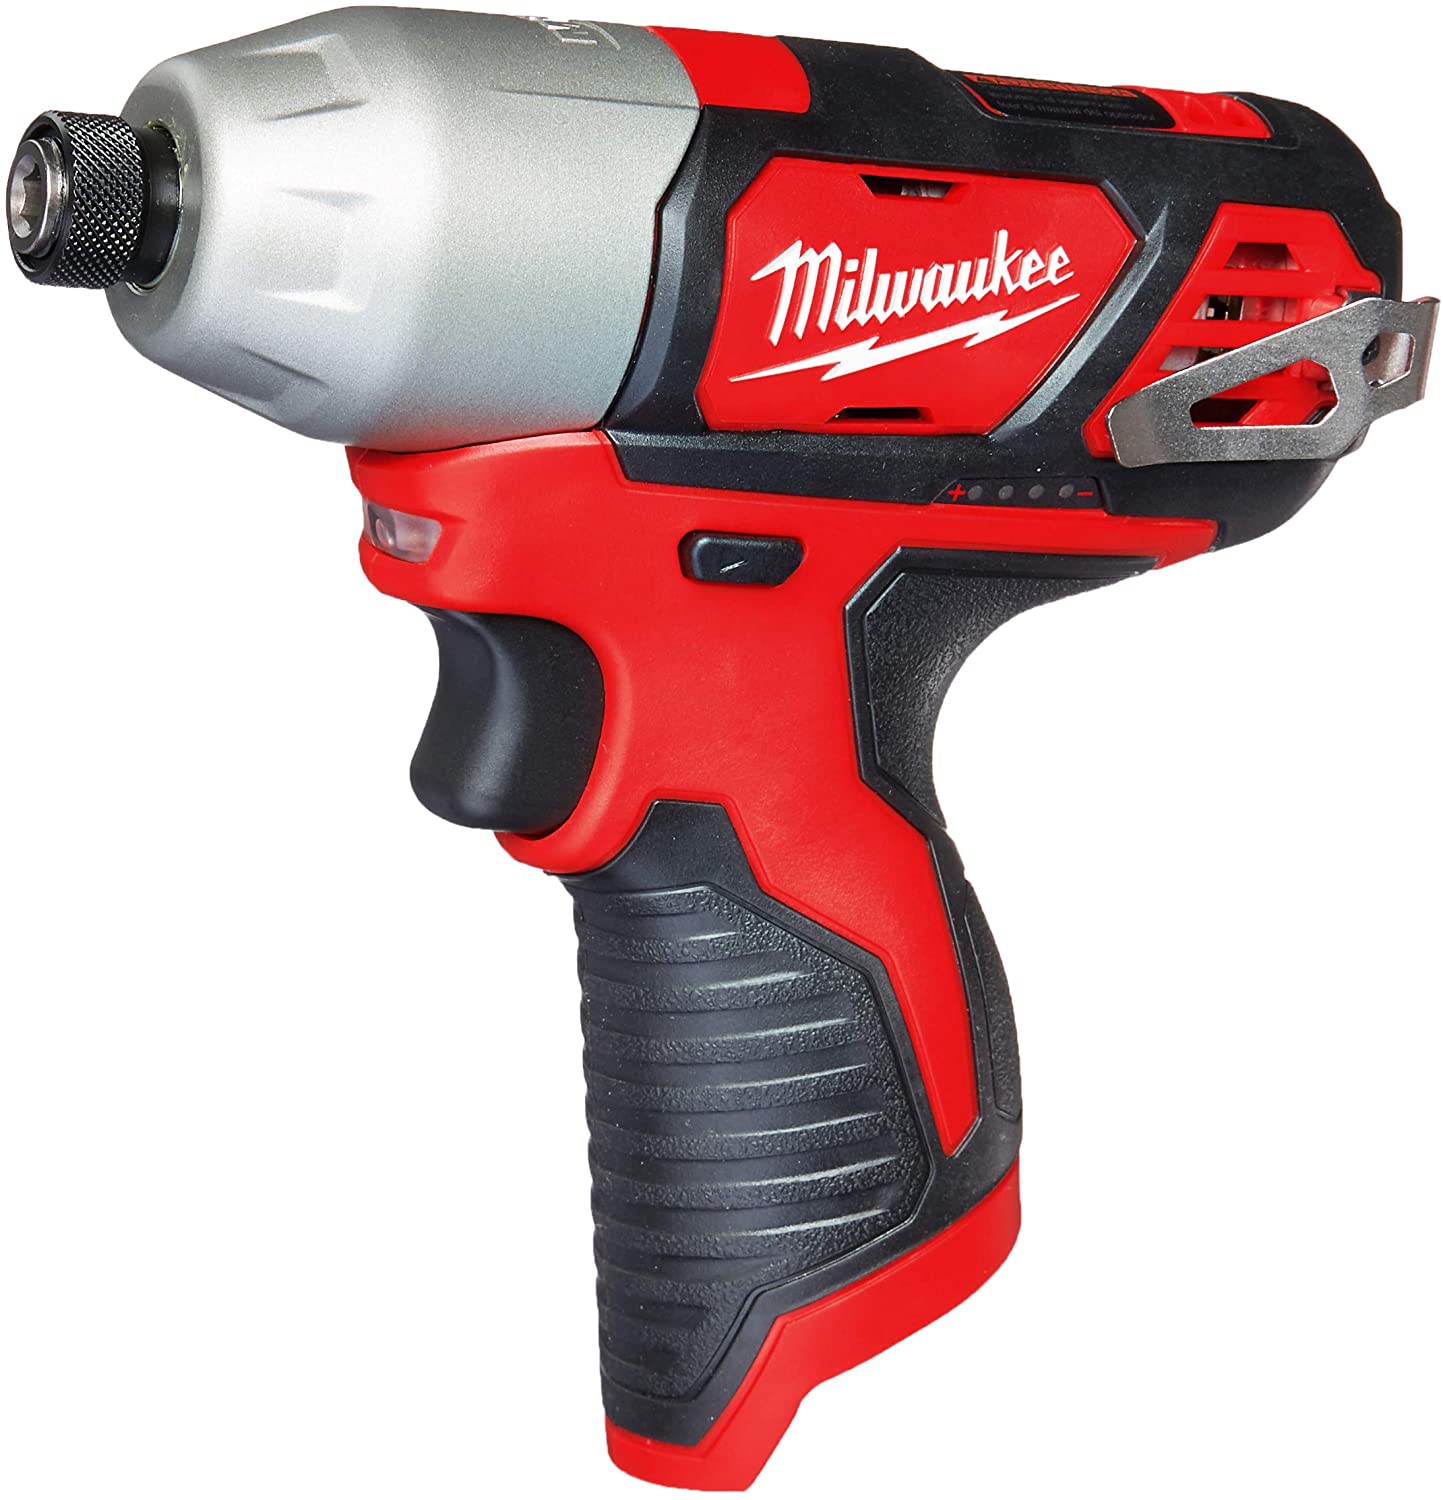 Milwaukee 2494-22 M12 Cordless Combination 3/8" Drill / Driver and 1/4" Hex Impact Driver Dual Power Tool Kit (2 Lithium Ion Batteries, Charger, and Bag Included) - image 2 of 7